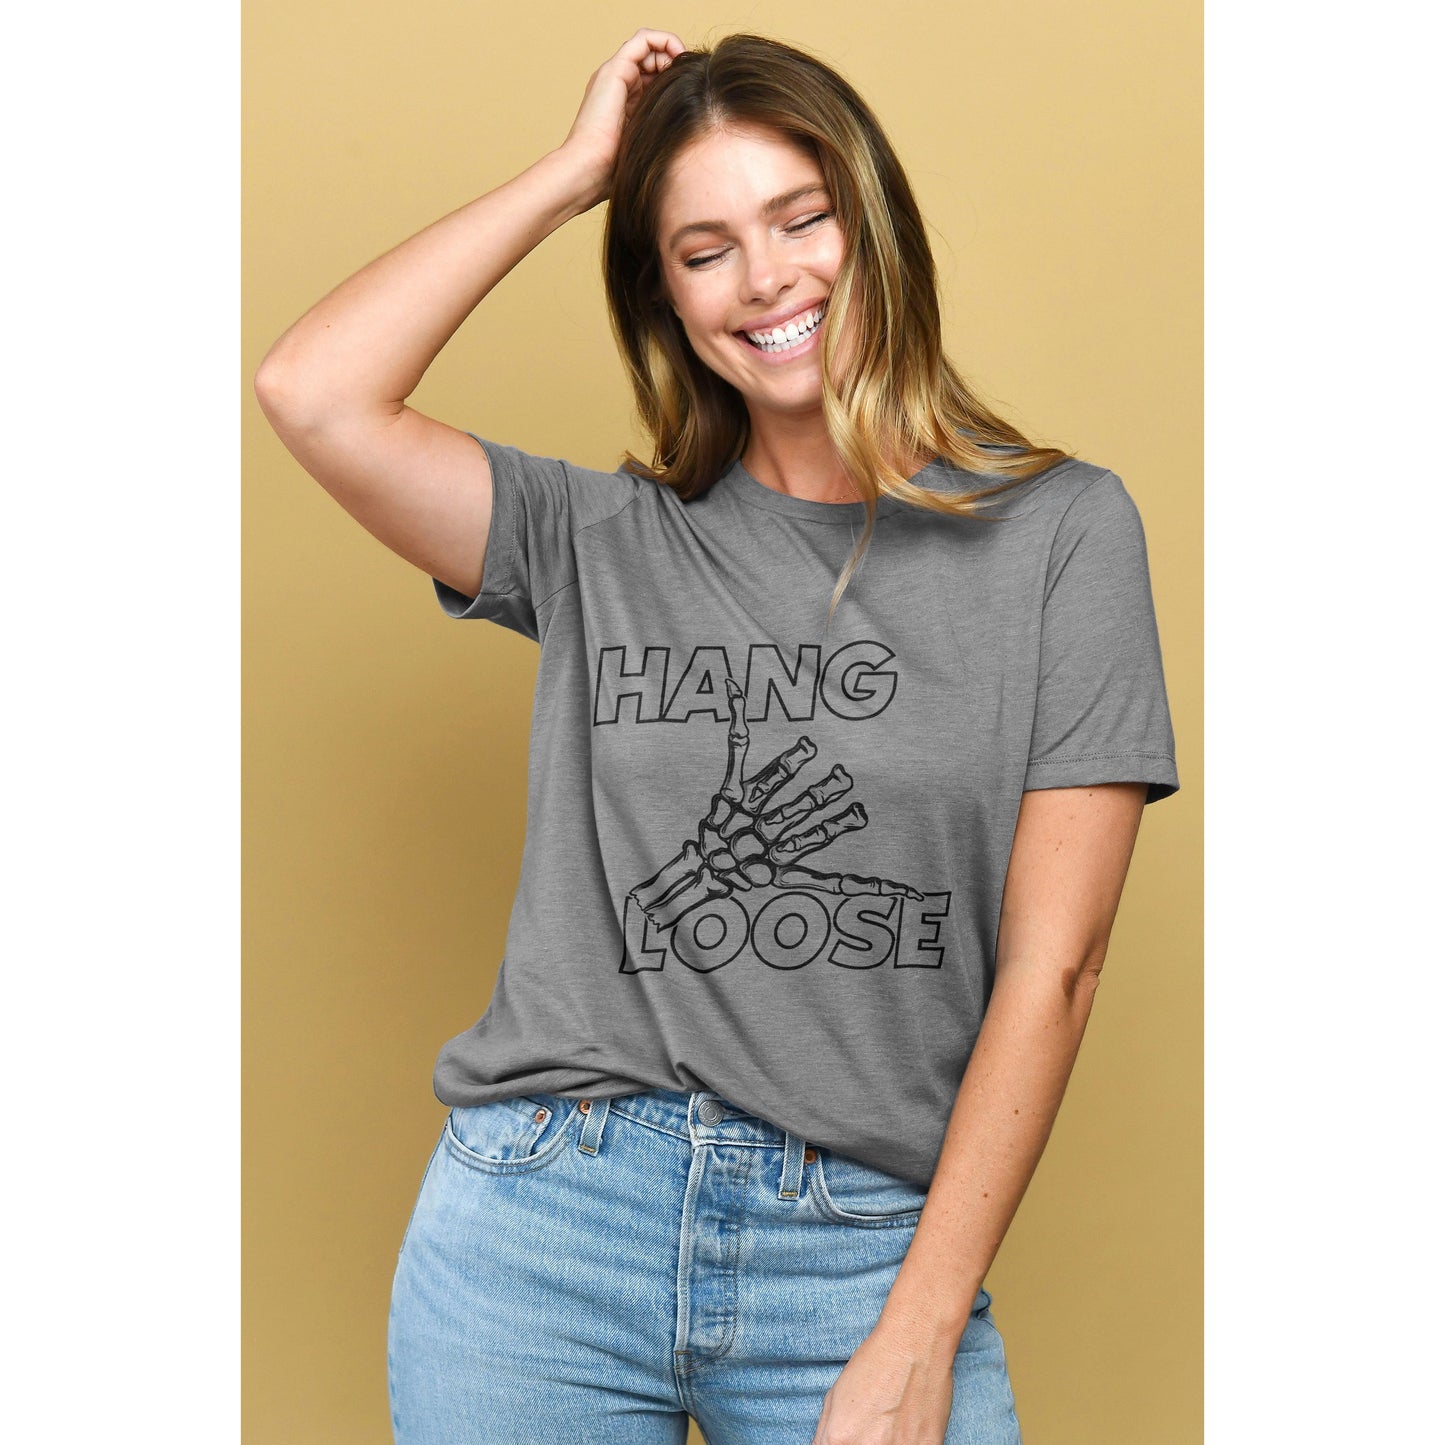 Hang Loose - thread tank | Stories you can wear.